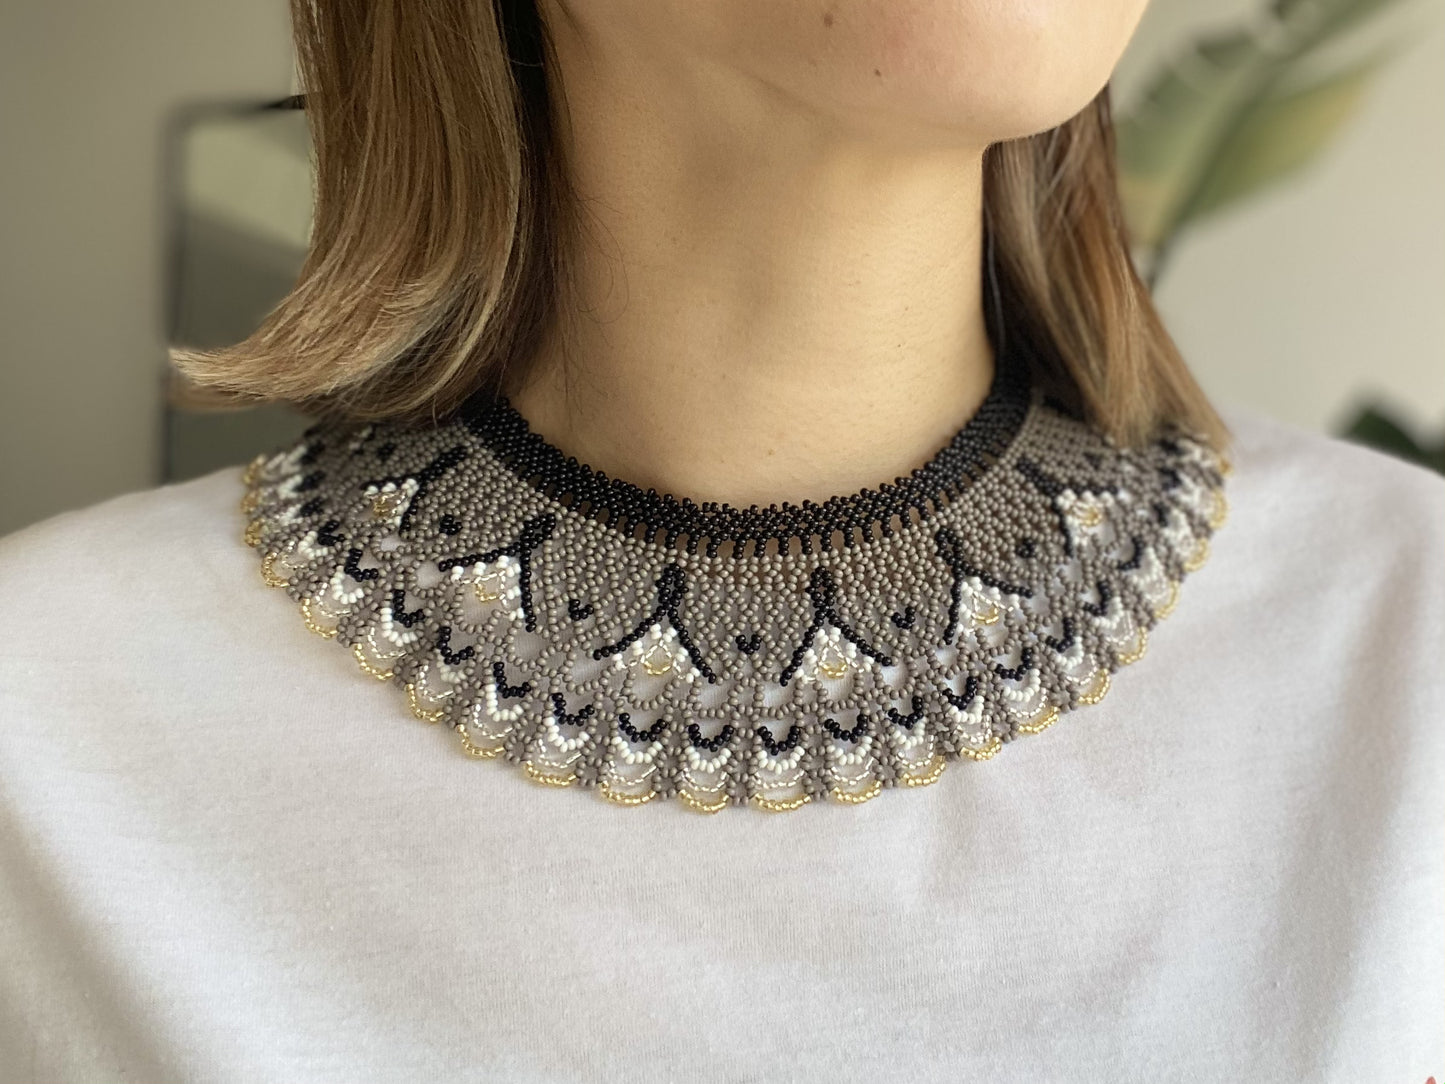 Enlace Beads Collar Necklace / Ladylike